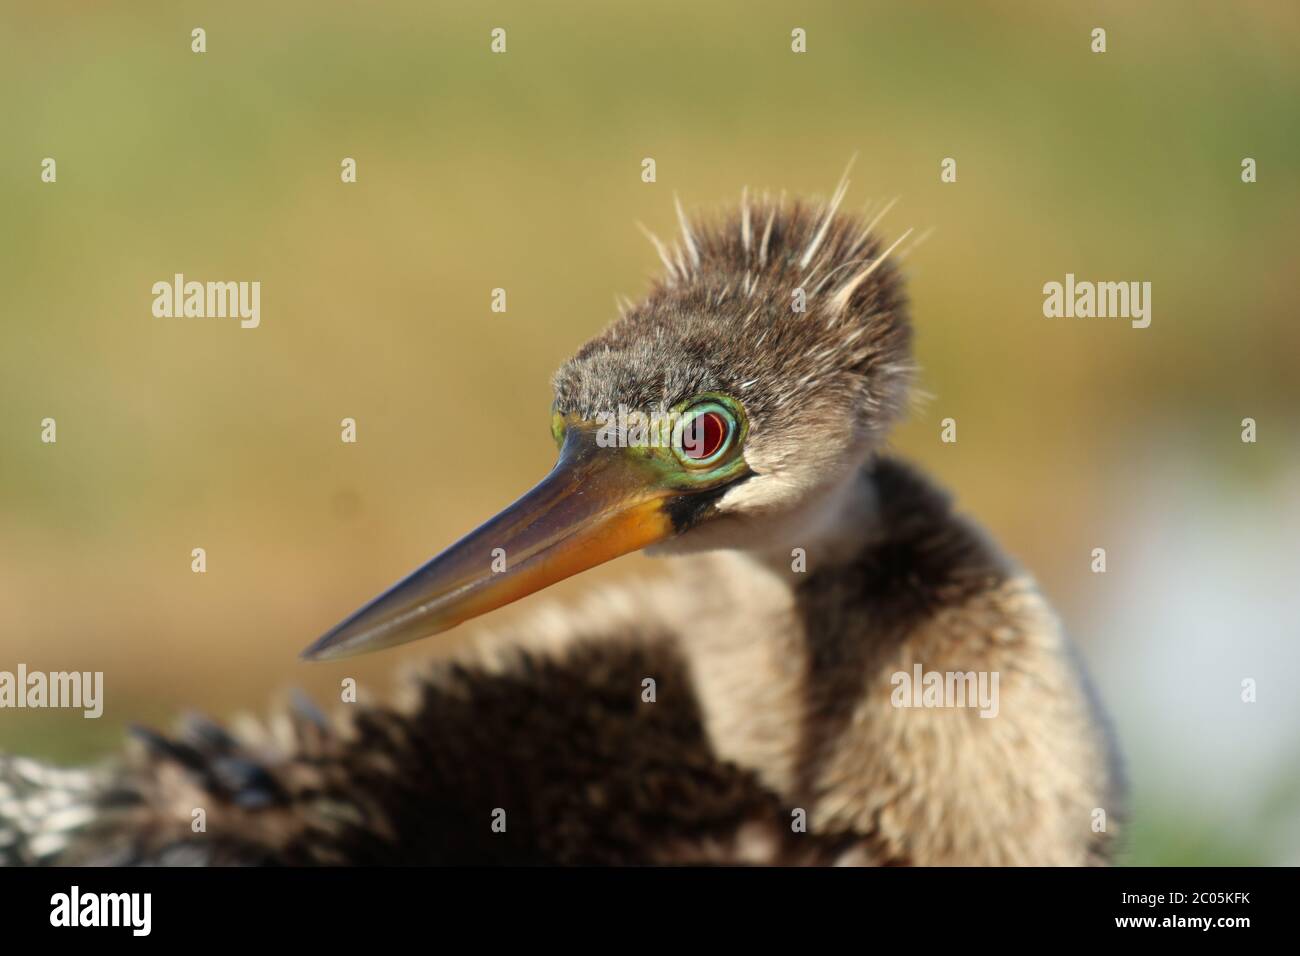 Capture of Anhinga in the Everglades national park, Florida. Stock Photo